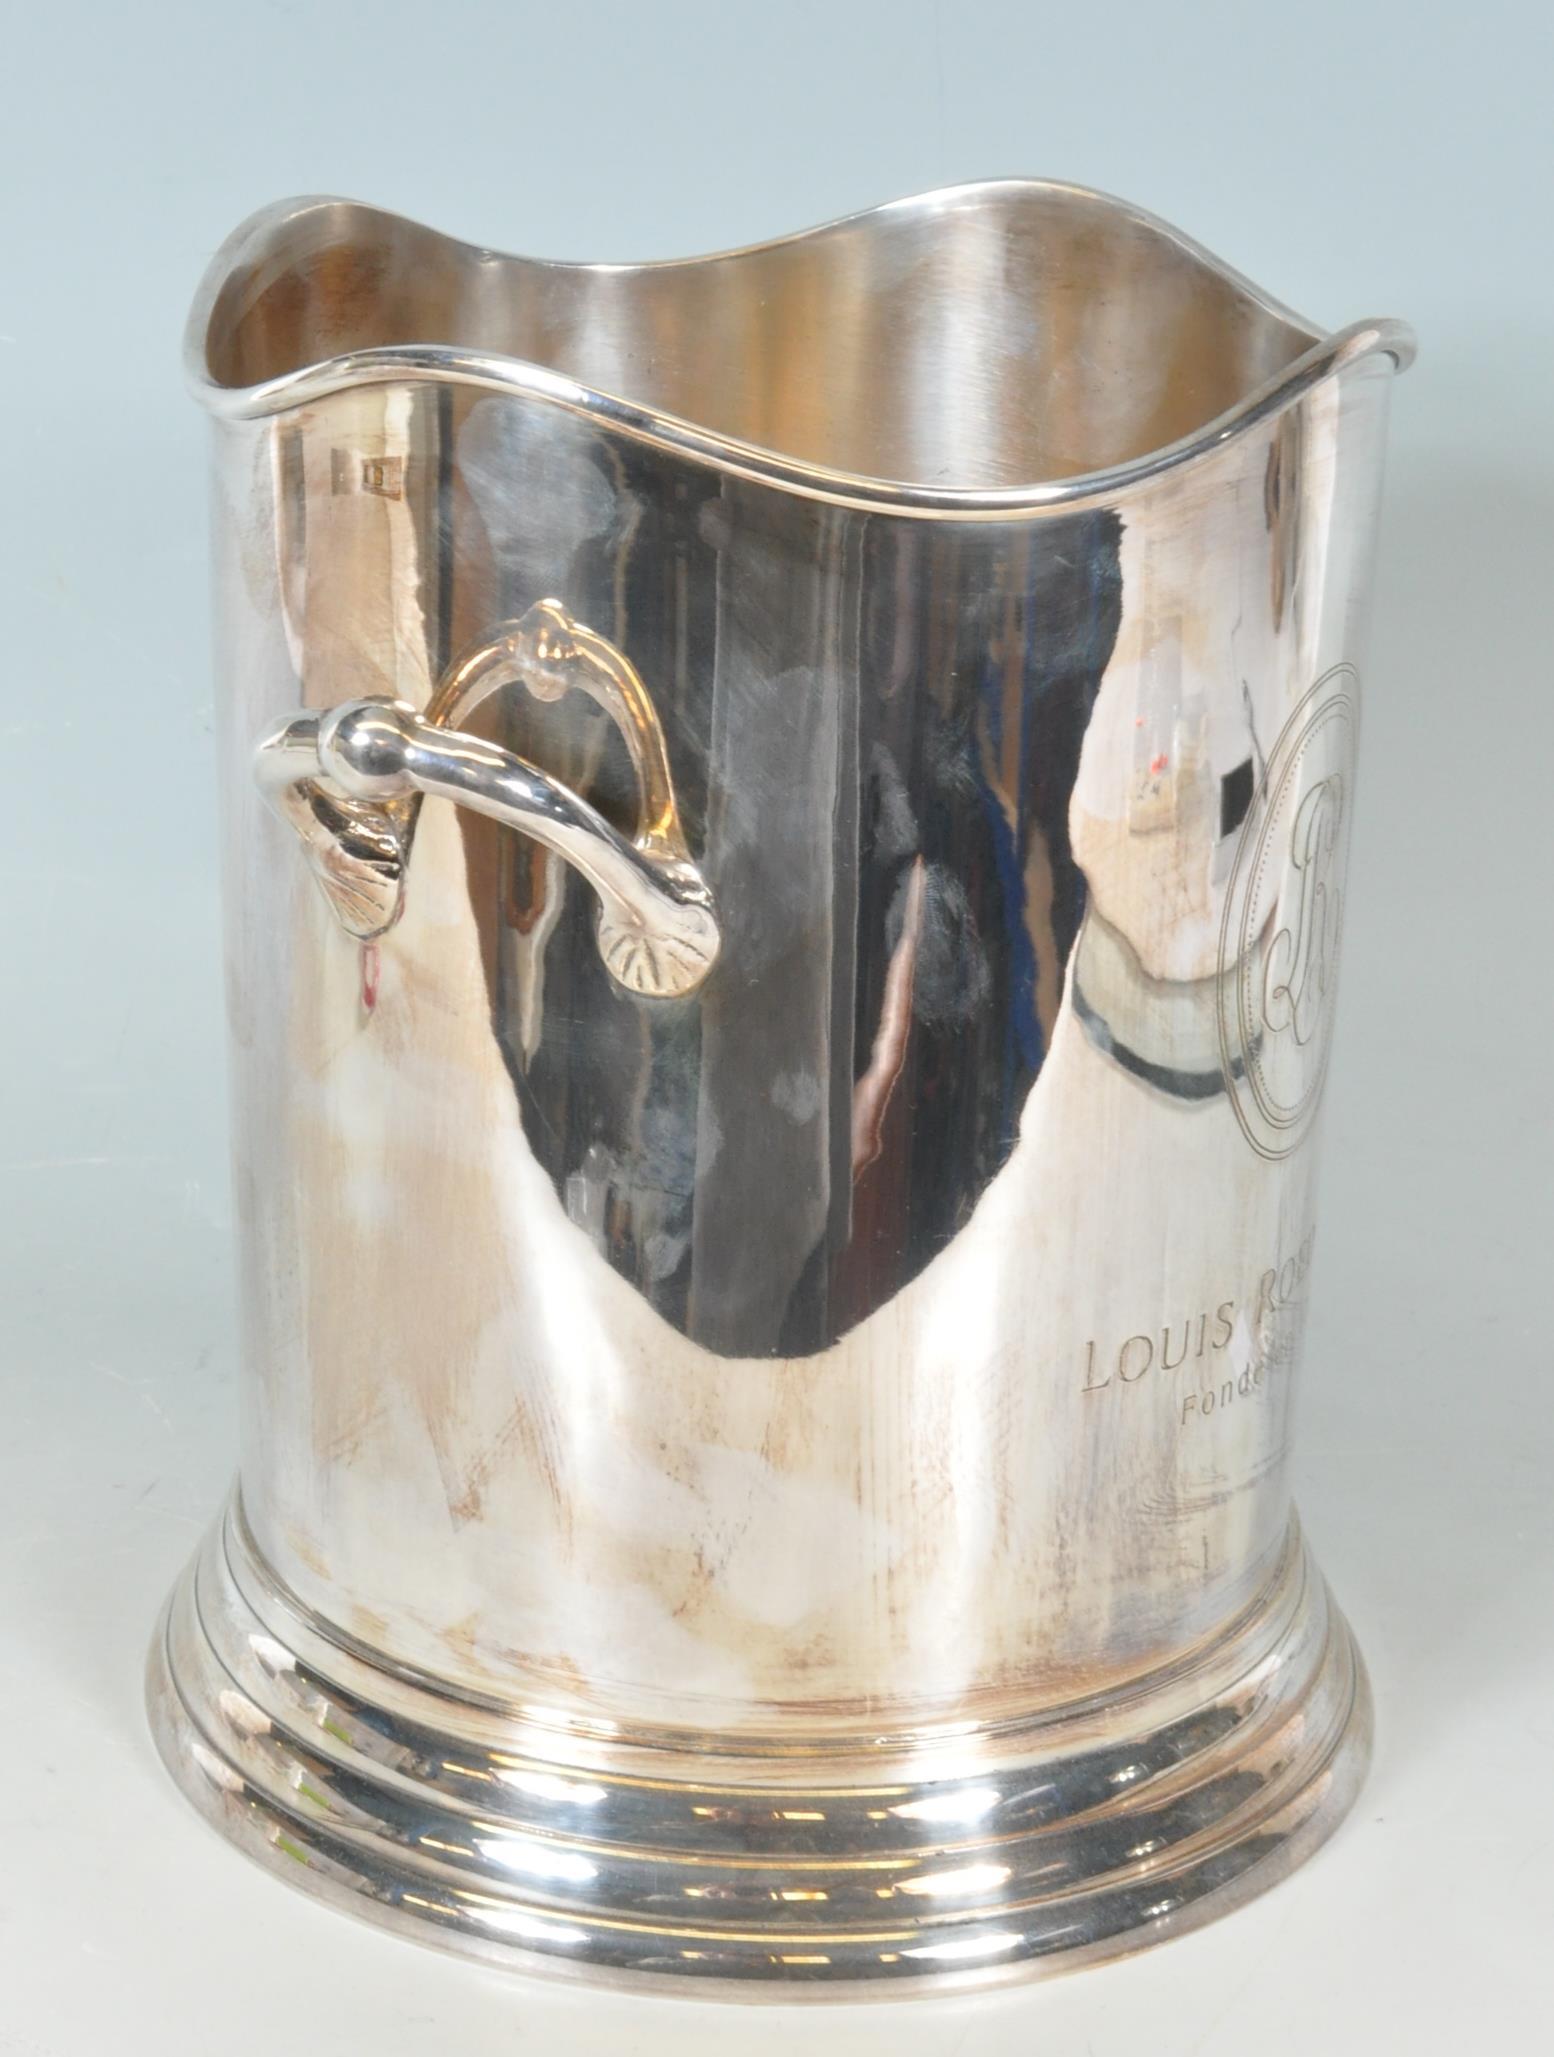 20TH CENTURY LOUIS ROEDERER CHAMPAGNE ICE BUCKET - Image 5 of 7